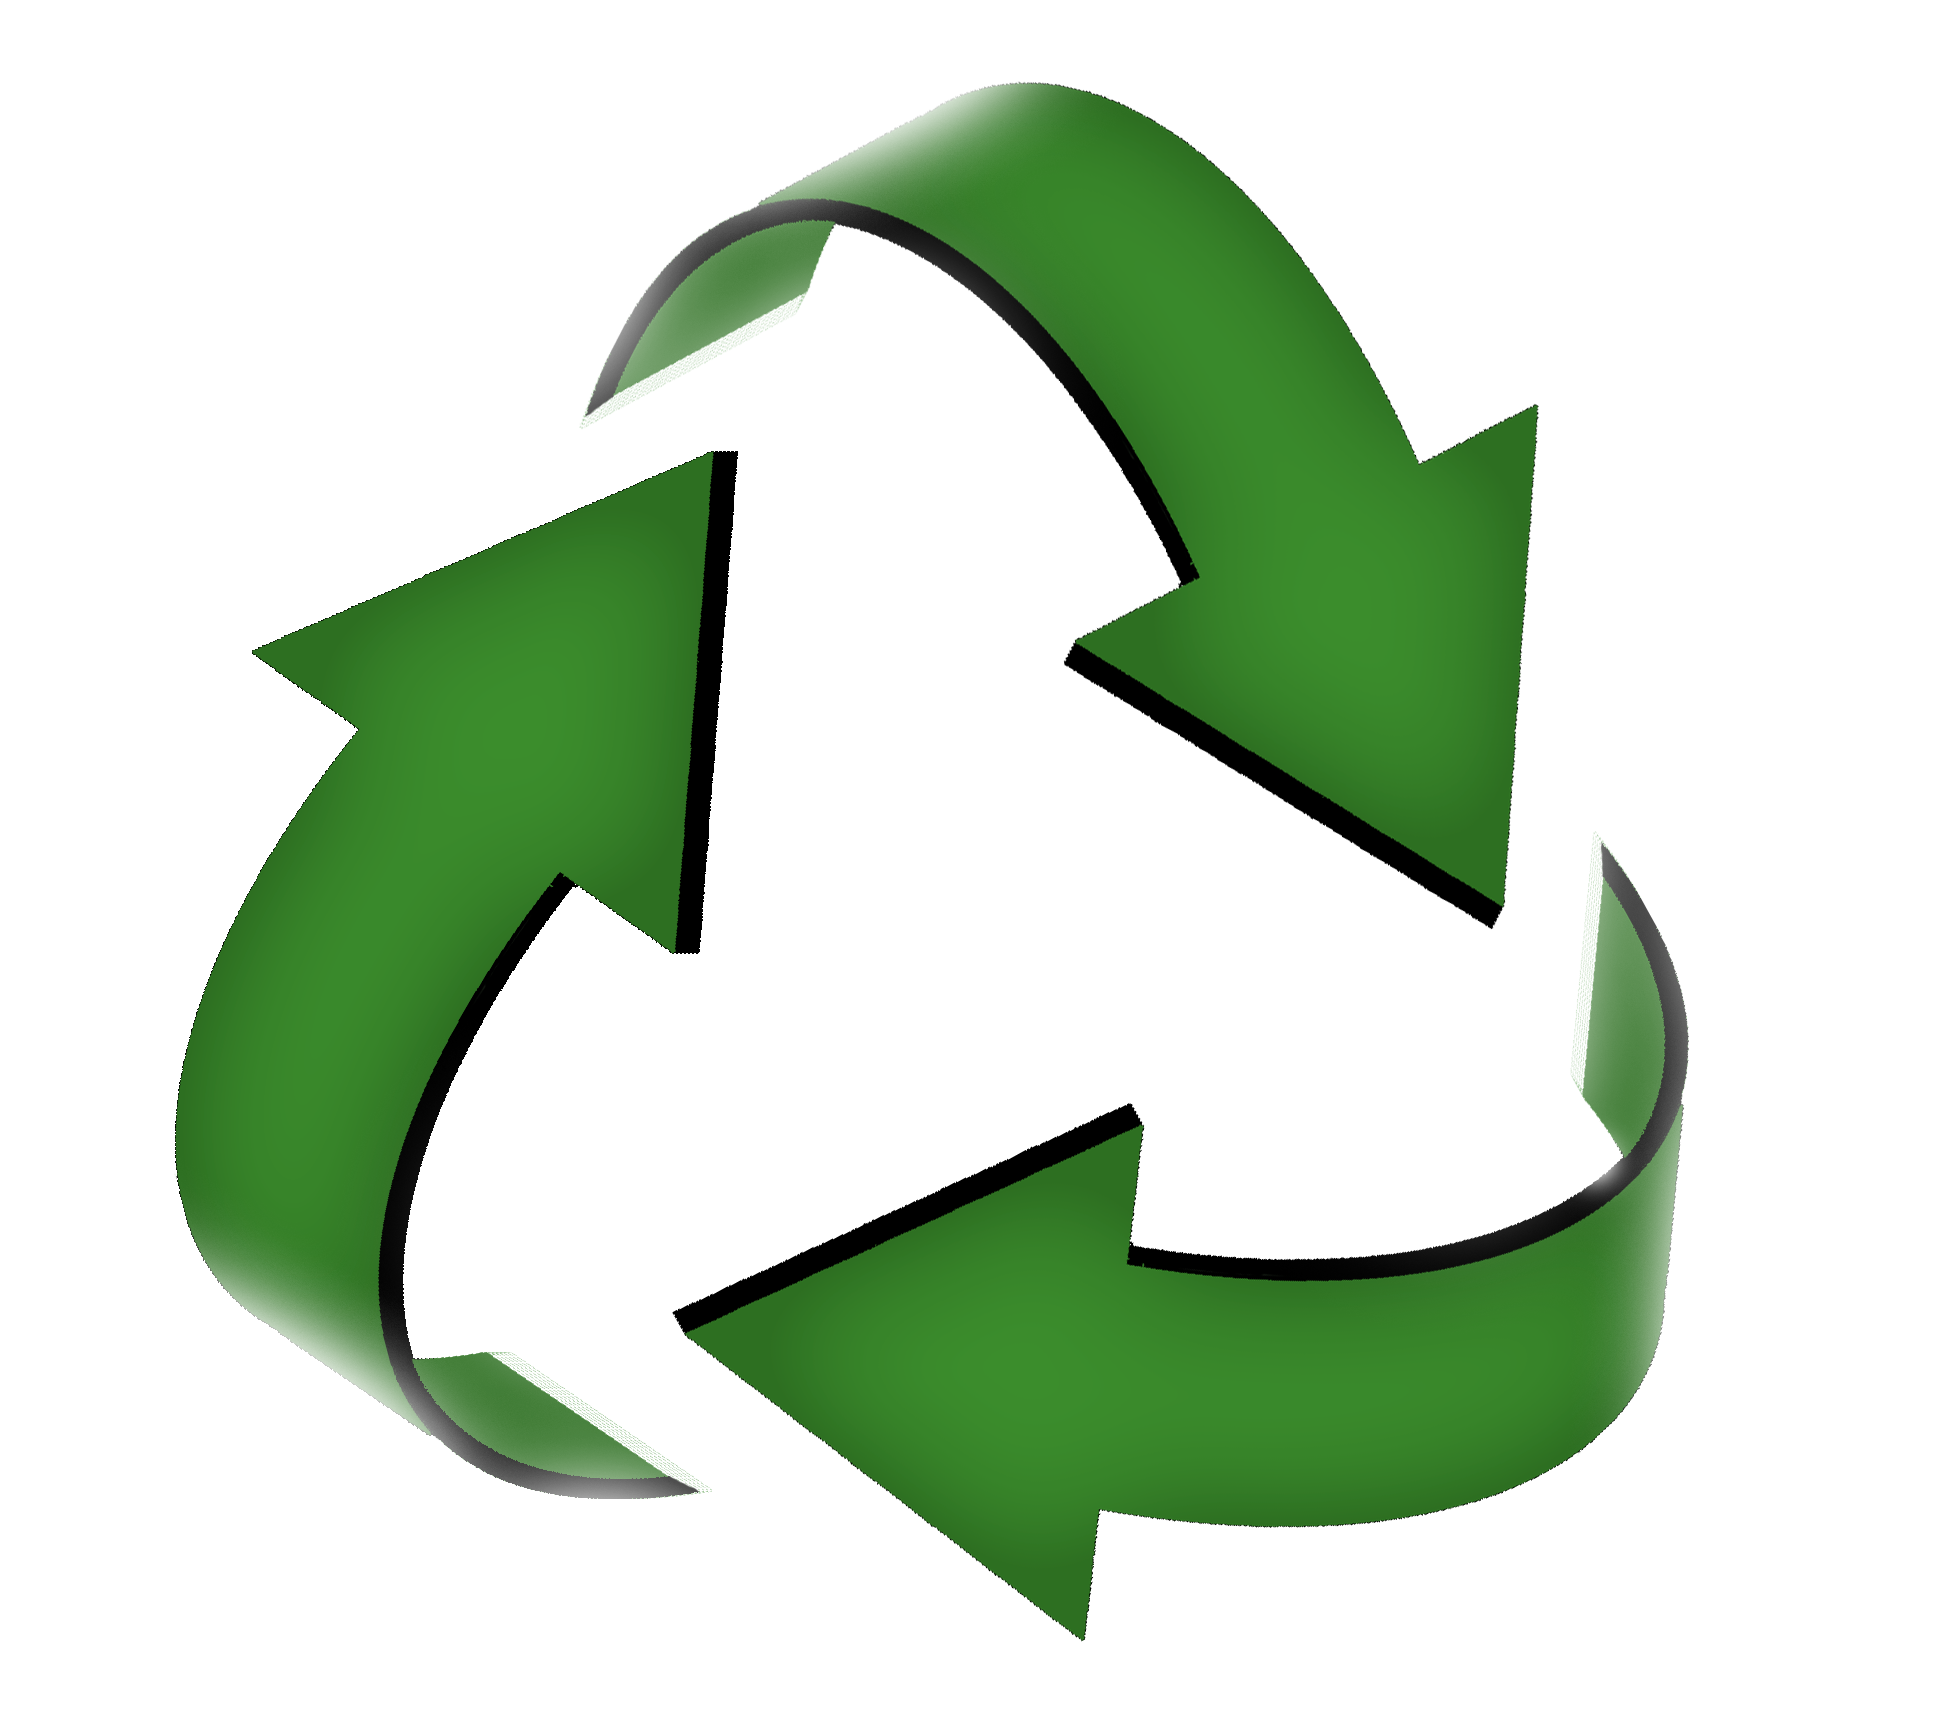 Green Recycling Symbol - ClipArt Best